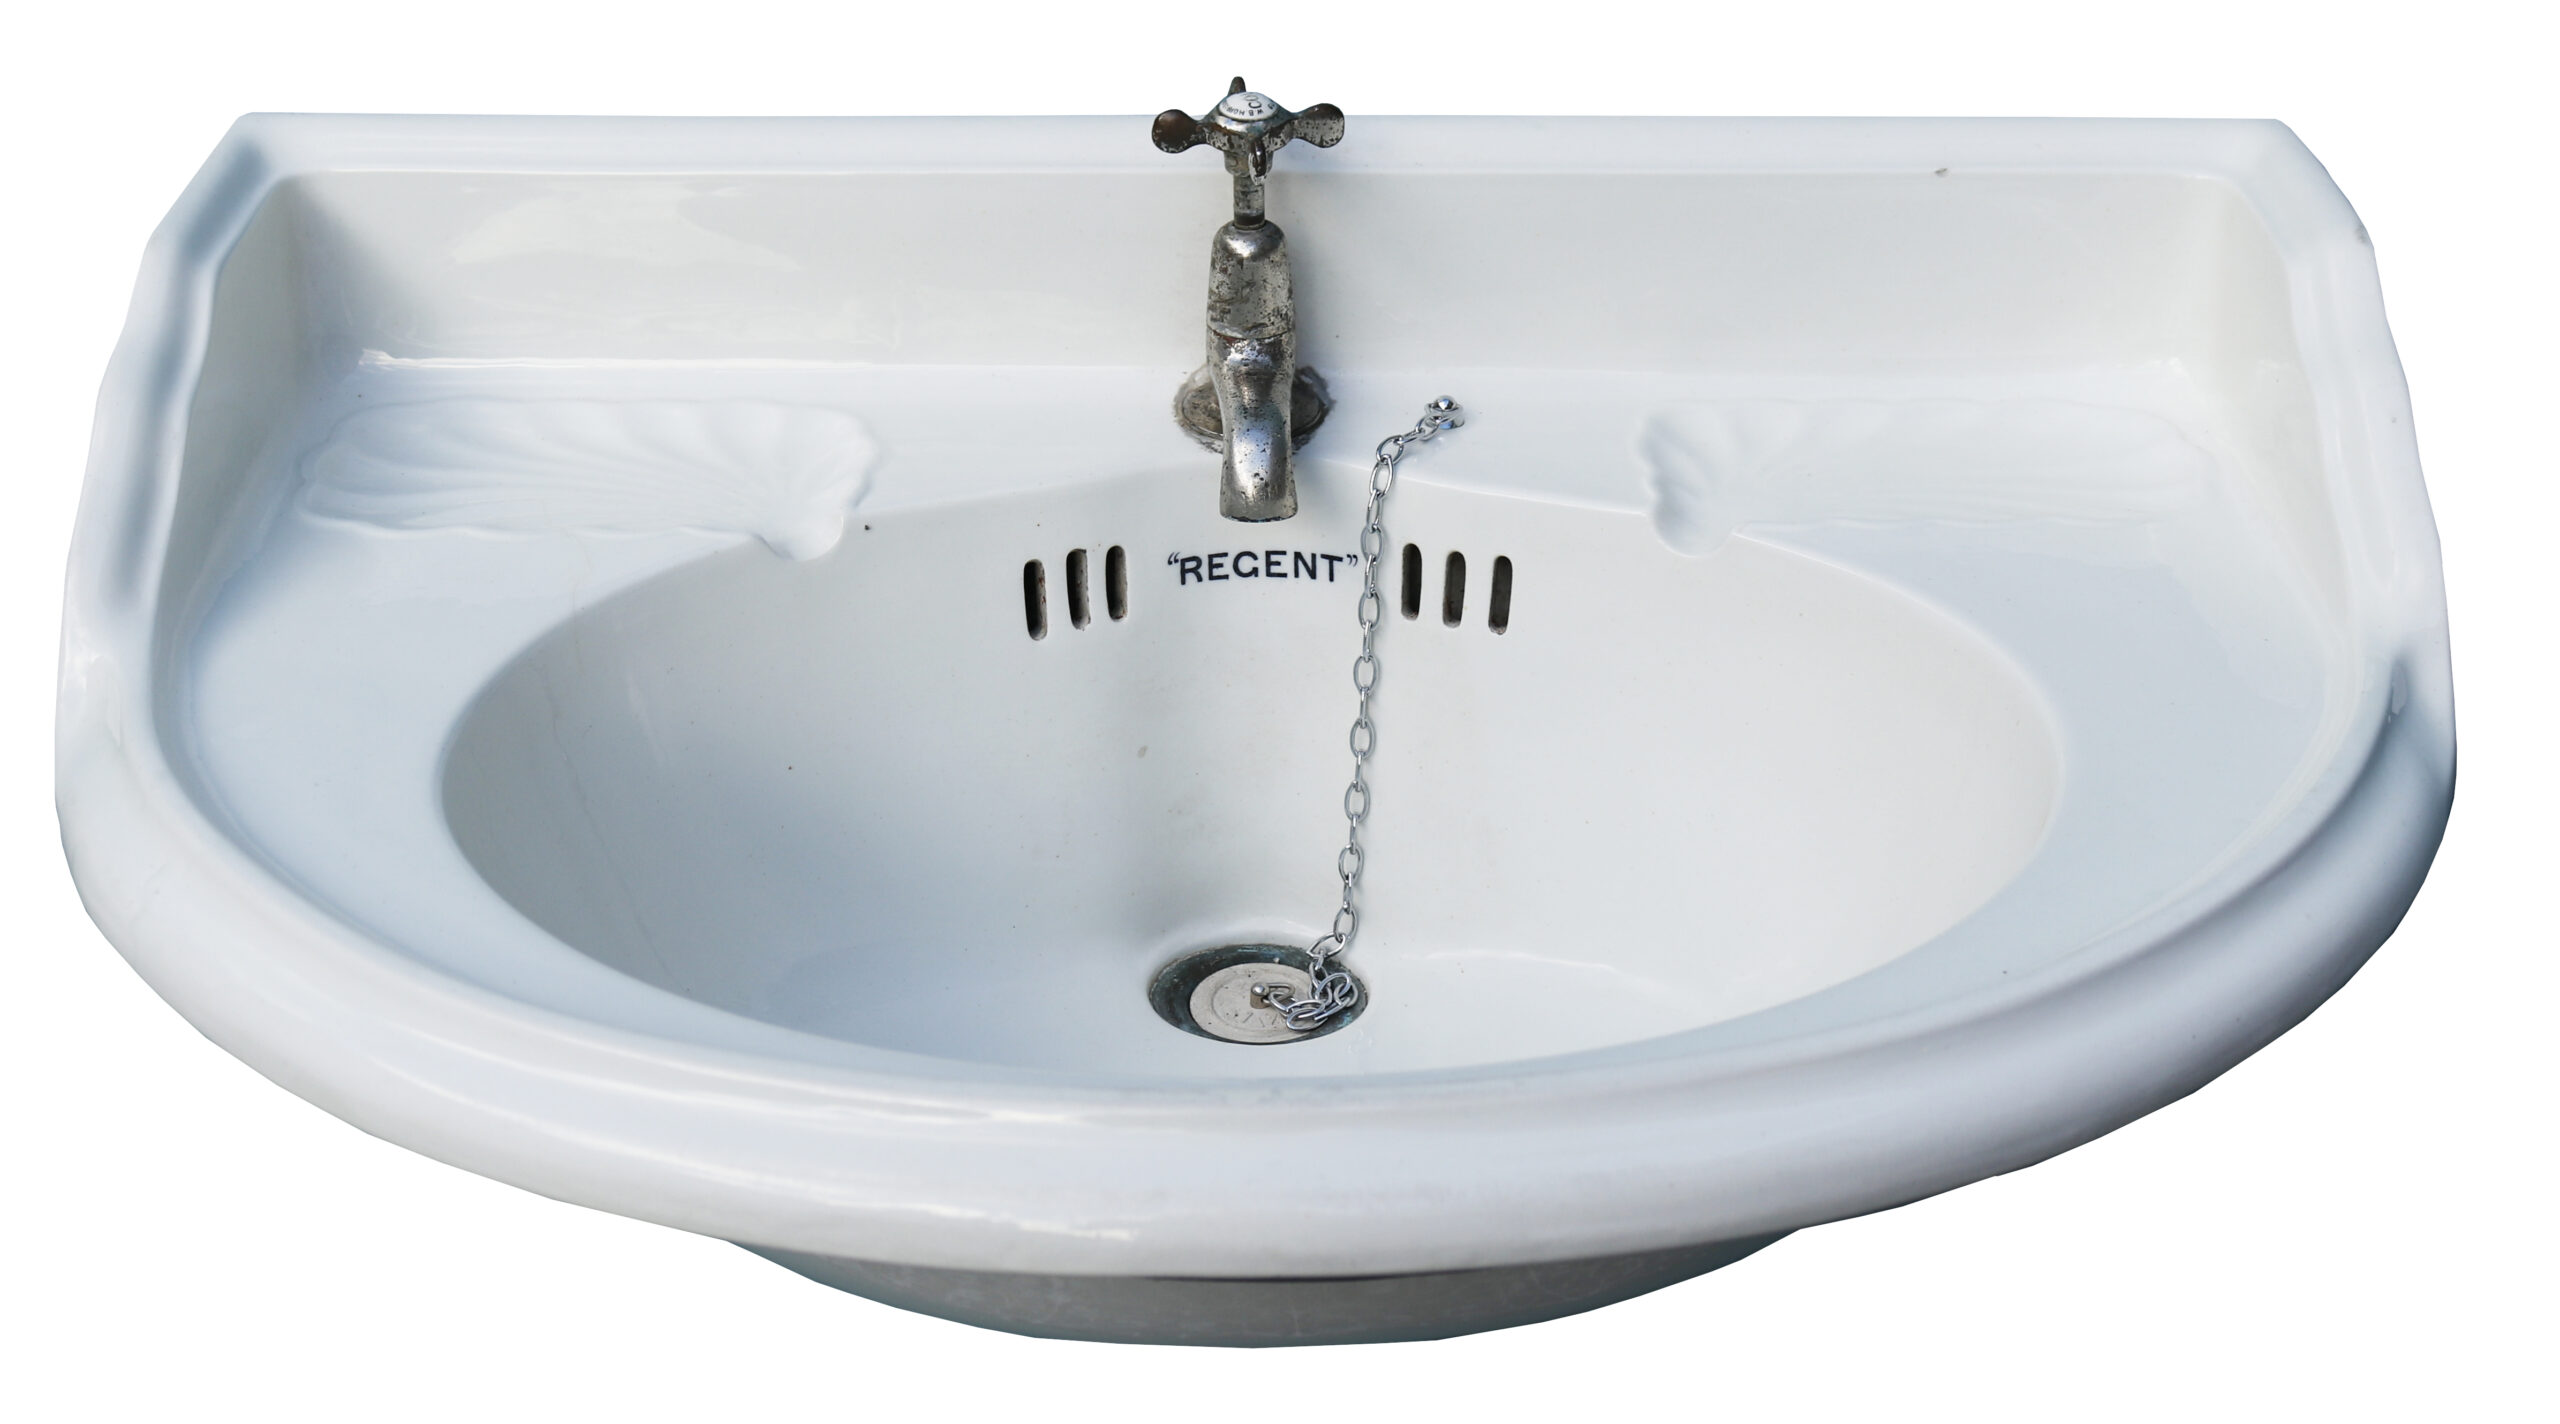 Antique Rounded Porcelain Sink with Bracket